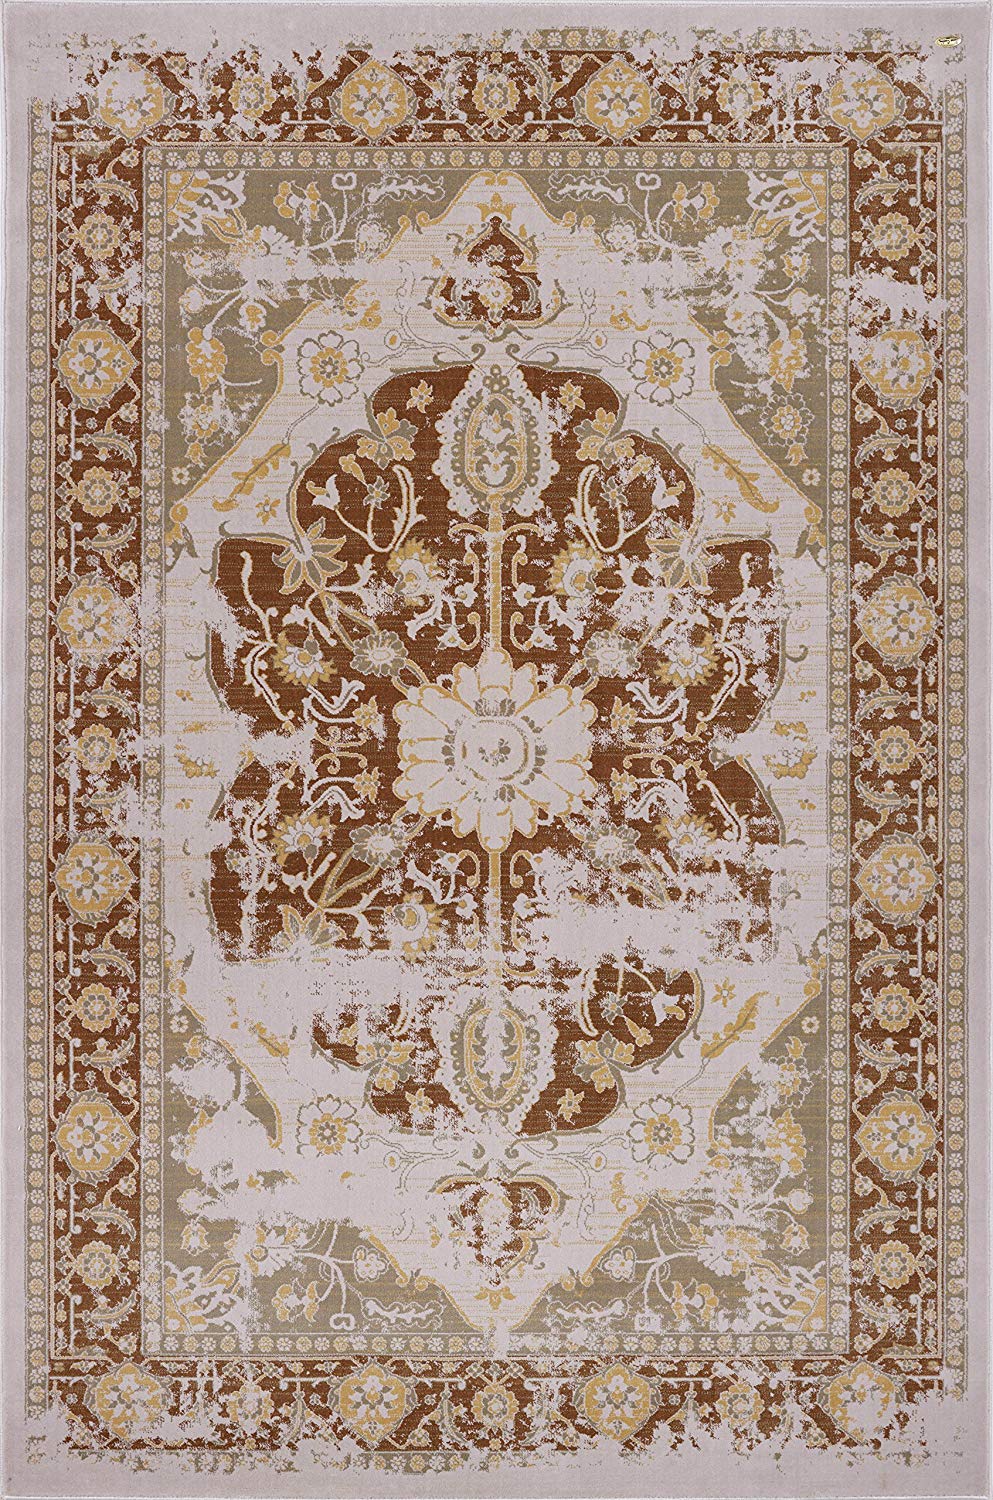 https://pierrecardinrugs.com/cdn/shop/products/area_rugs_8x10_area_rug_5x7_5x8_blue_luxury_bedroom_8x10_clearance_living_room_vintage_gray_grey_traditional_bohemian_kitchen_rugs_for_bedroom_living_room_abstract_rugs_area_patterns_5_973857a9-6cf4-4be2-b321-ad50466fb00e.jpg?v=1543267103